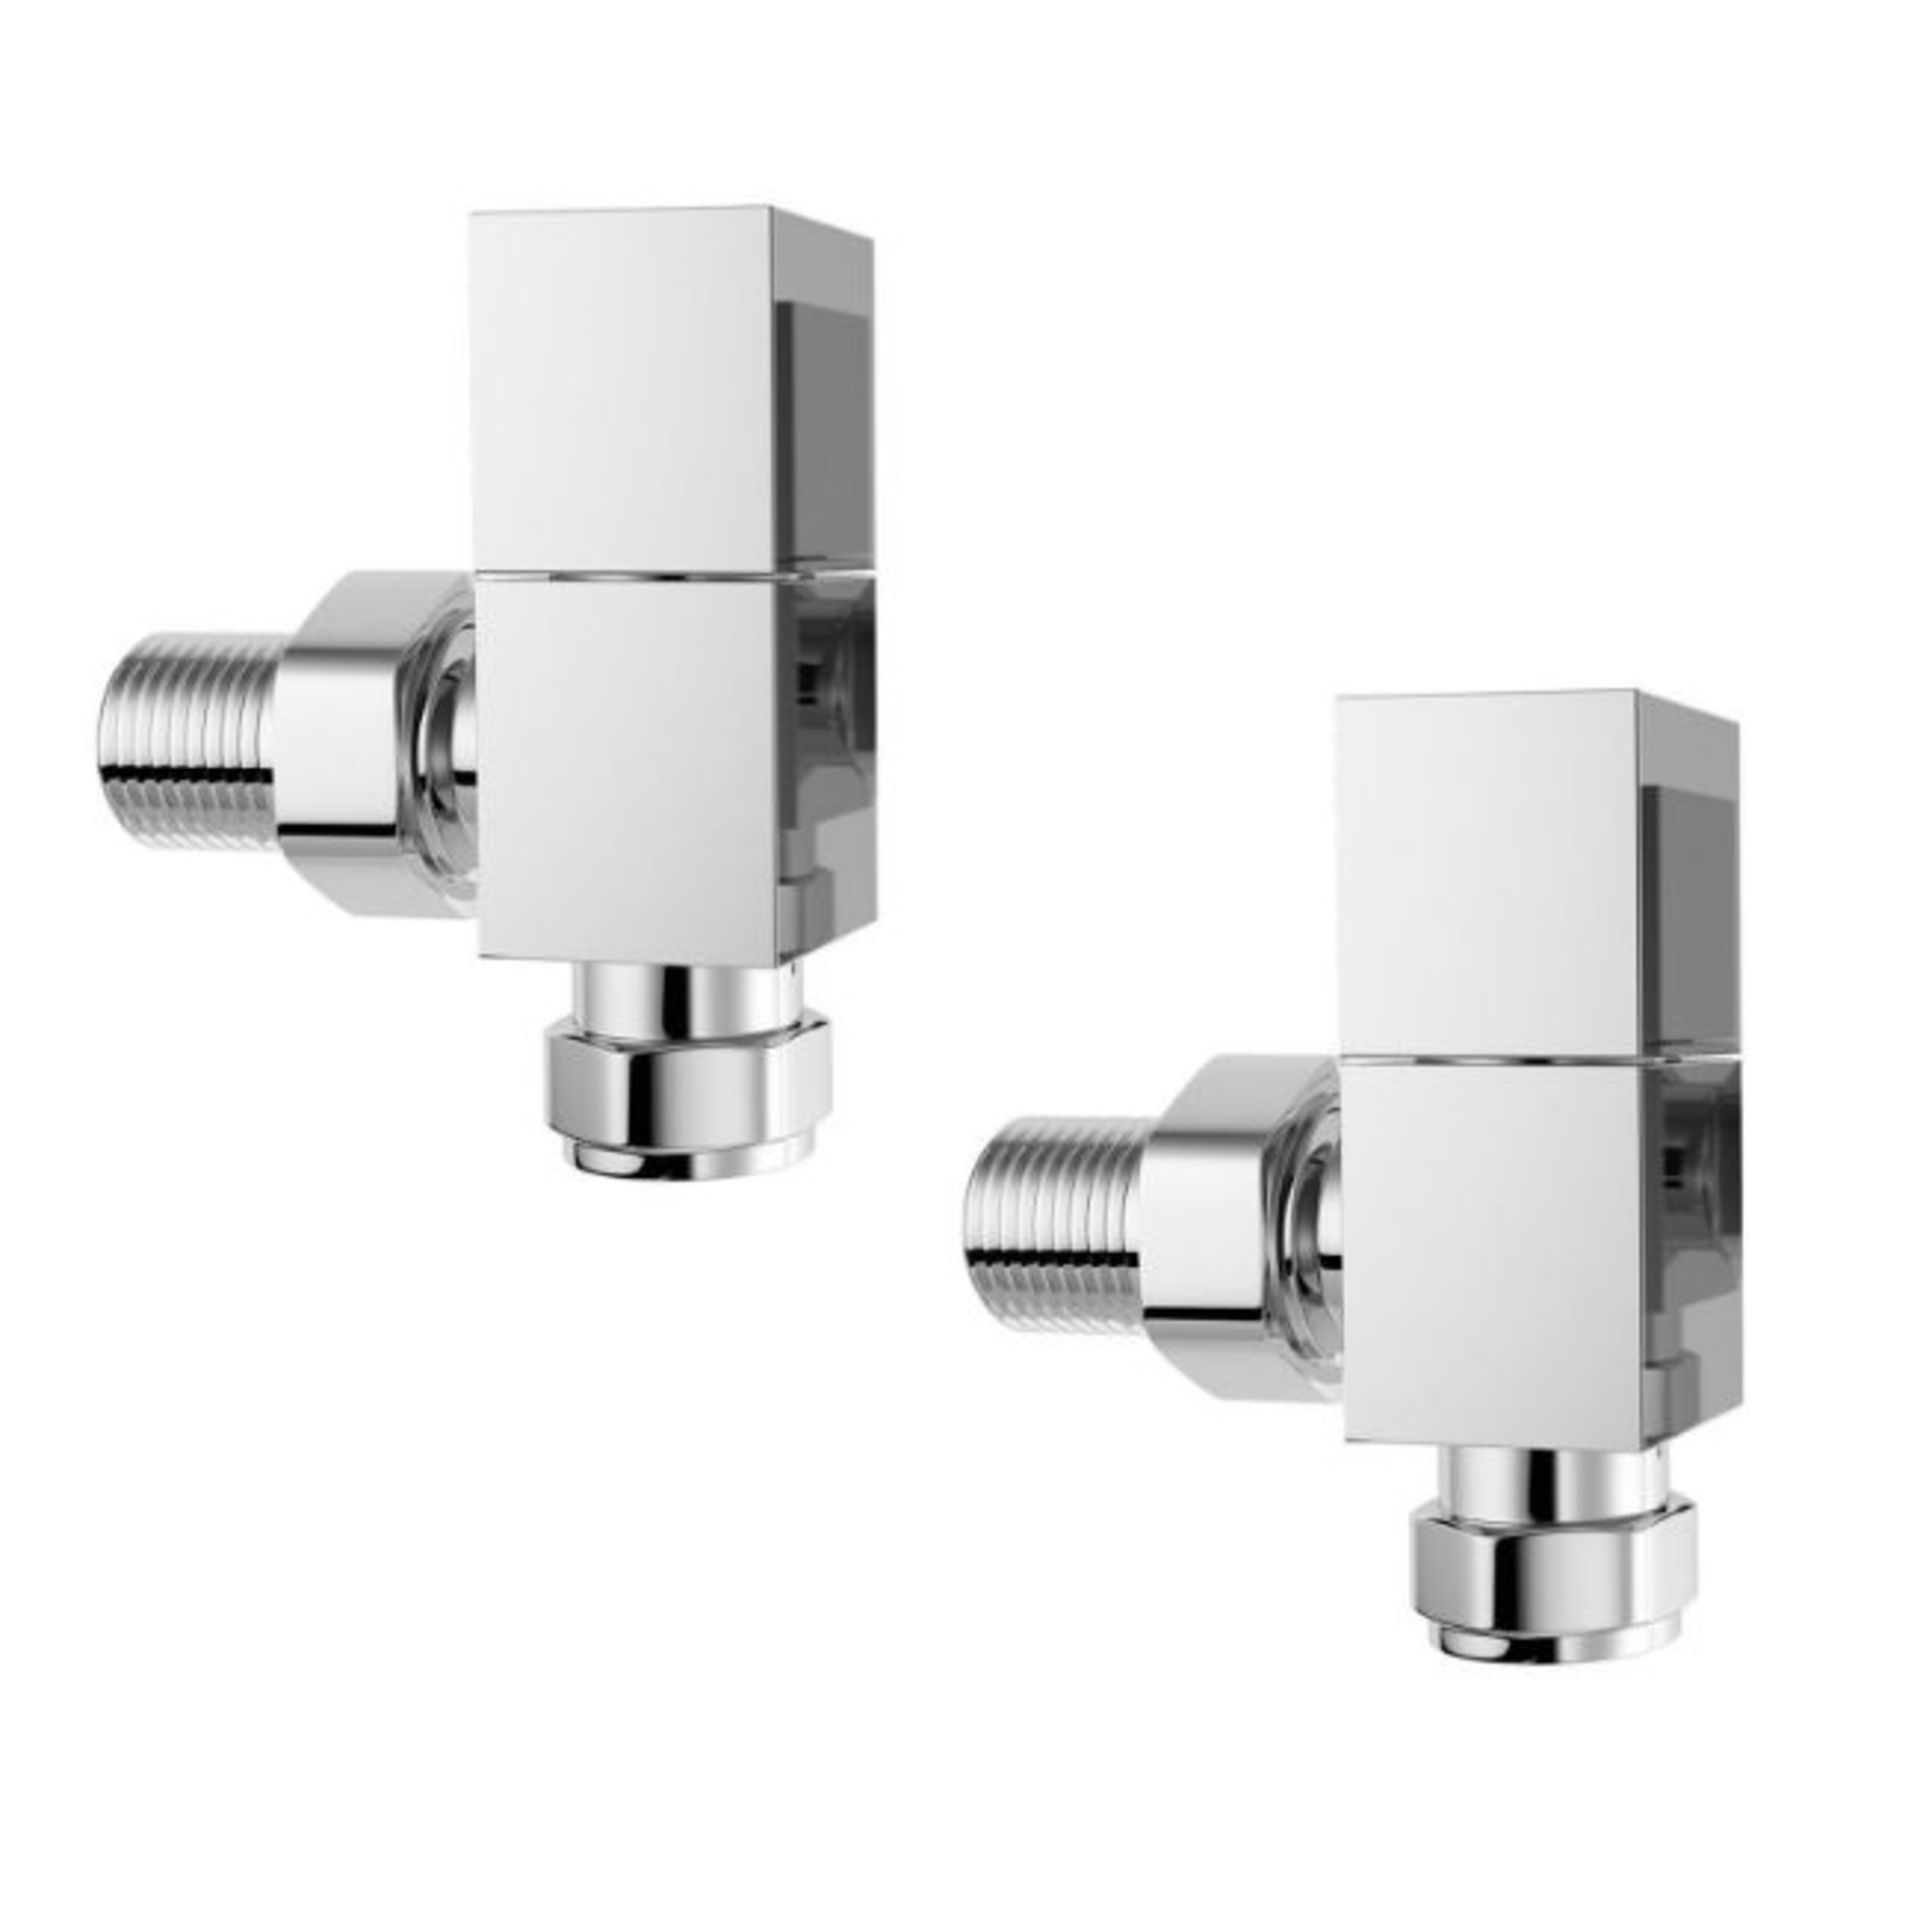 Square Chrome Angled Radiator Valves 15mm Central Heating Taps RA35A. Chrome Plated Solid Brass